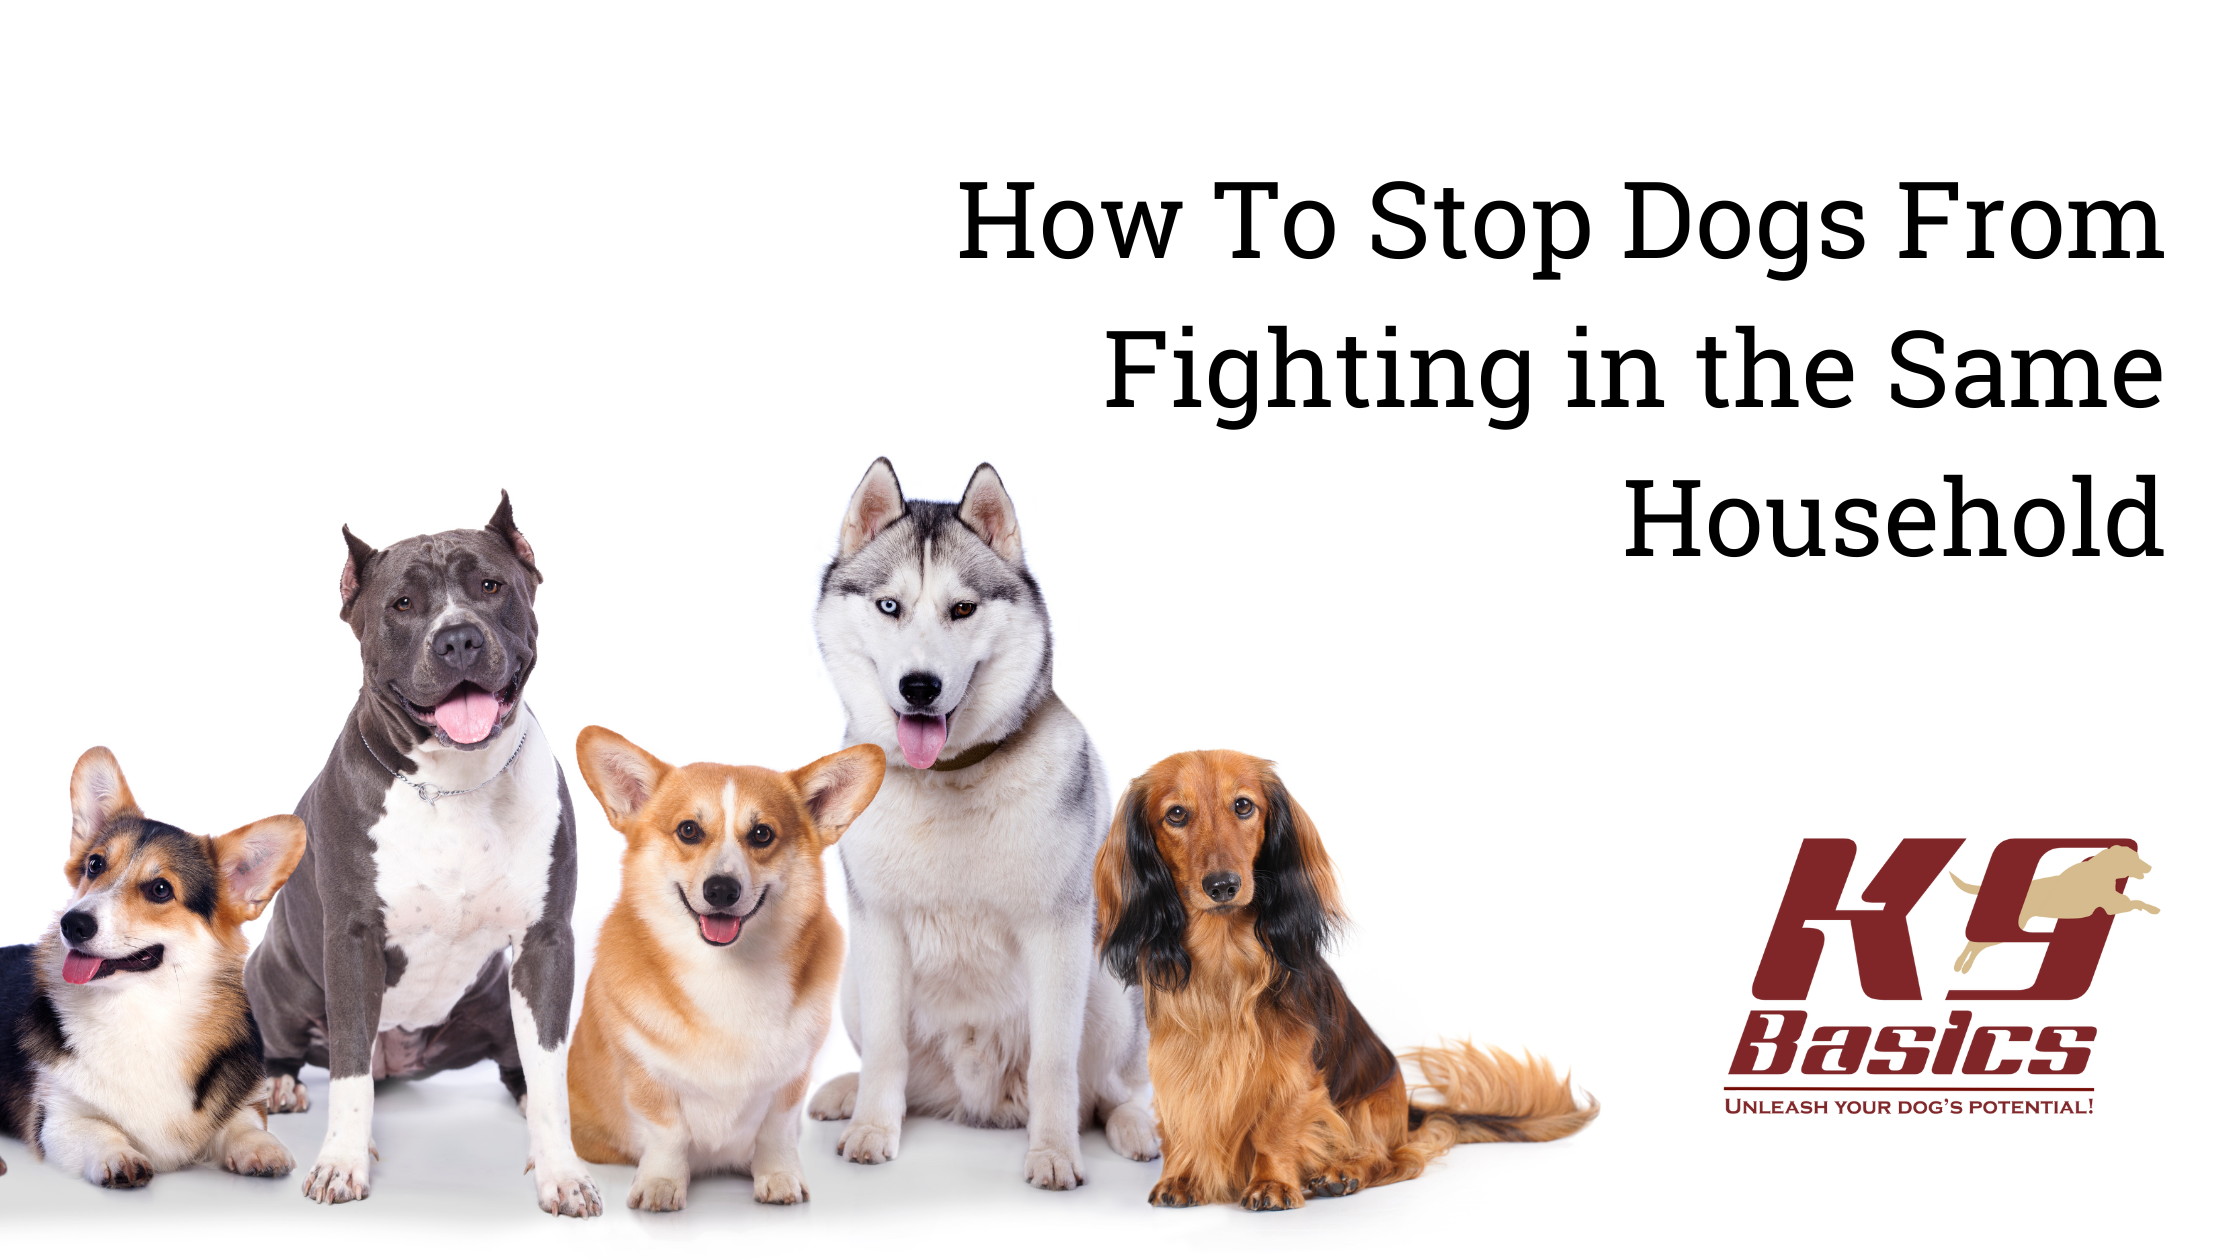 How to Stop Dogs From Fighting in the Same Household